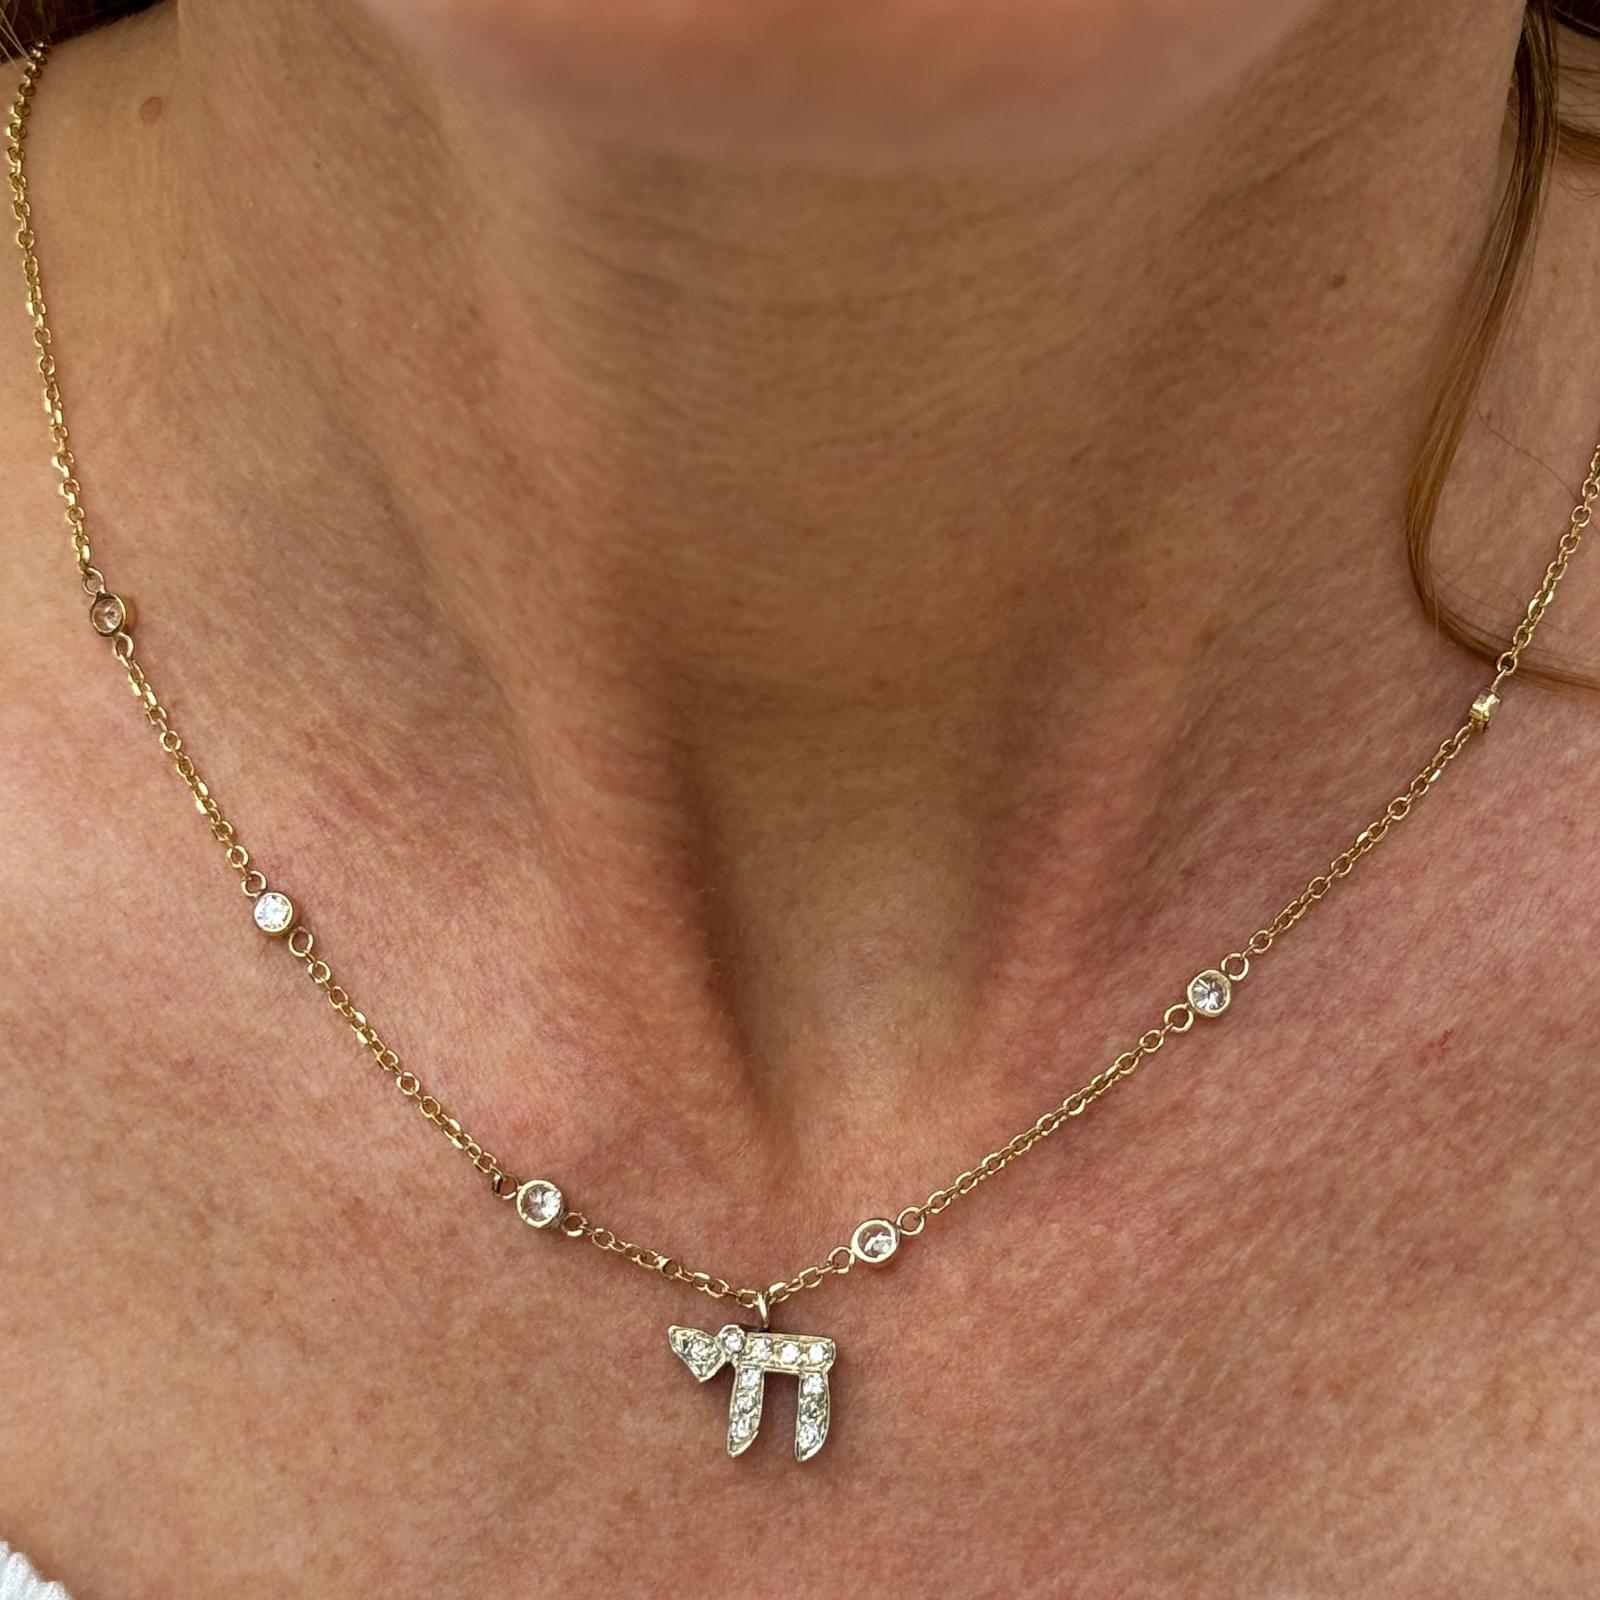 This diamond Chai pendant on a diamond by the yard necklace is a stunning and meaningful piece of jewelry that combines traditional symbolism with contemporary style.
The Chai pendant is a symbol in Jewish culture representing life, vitality, and